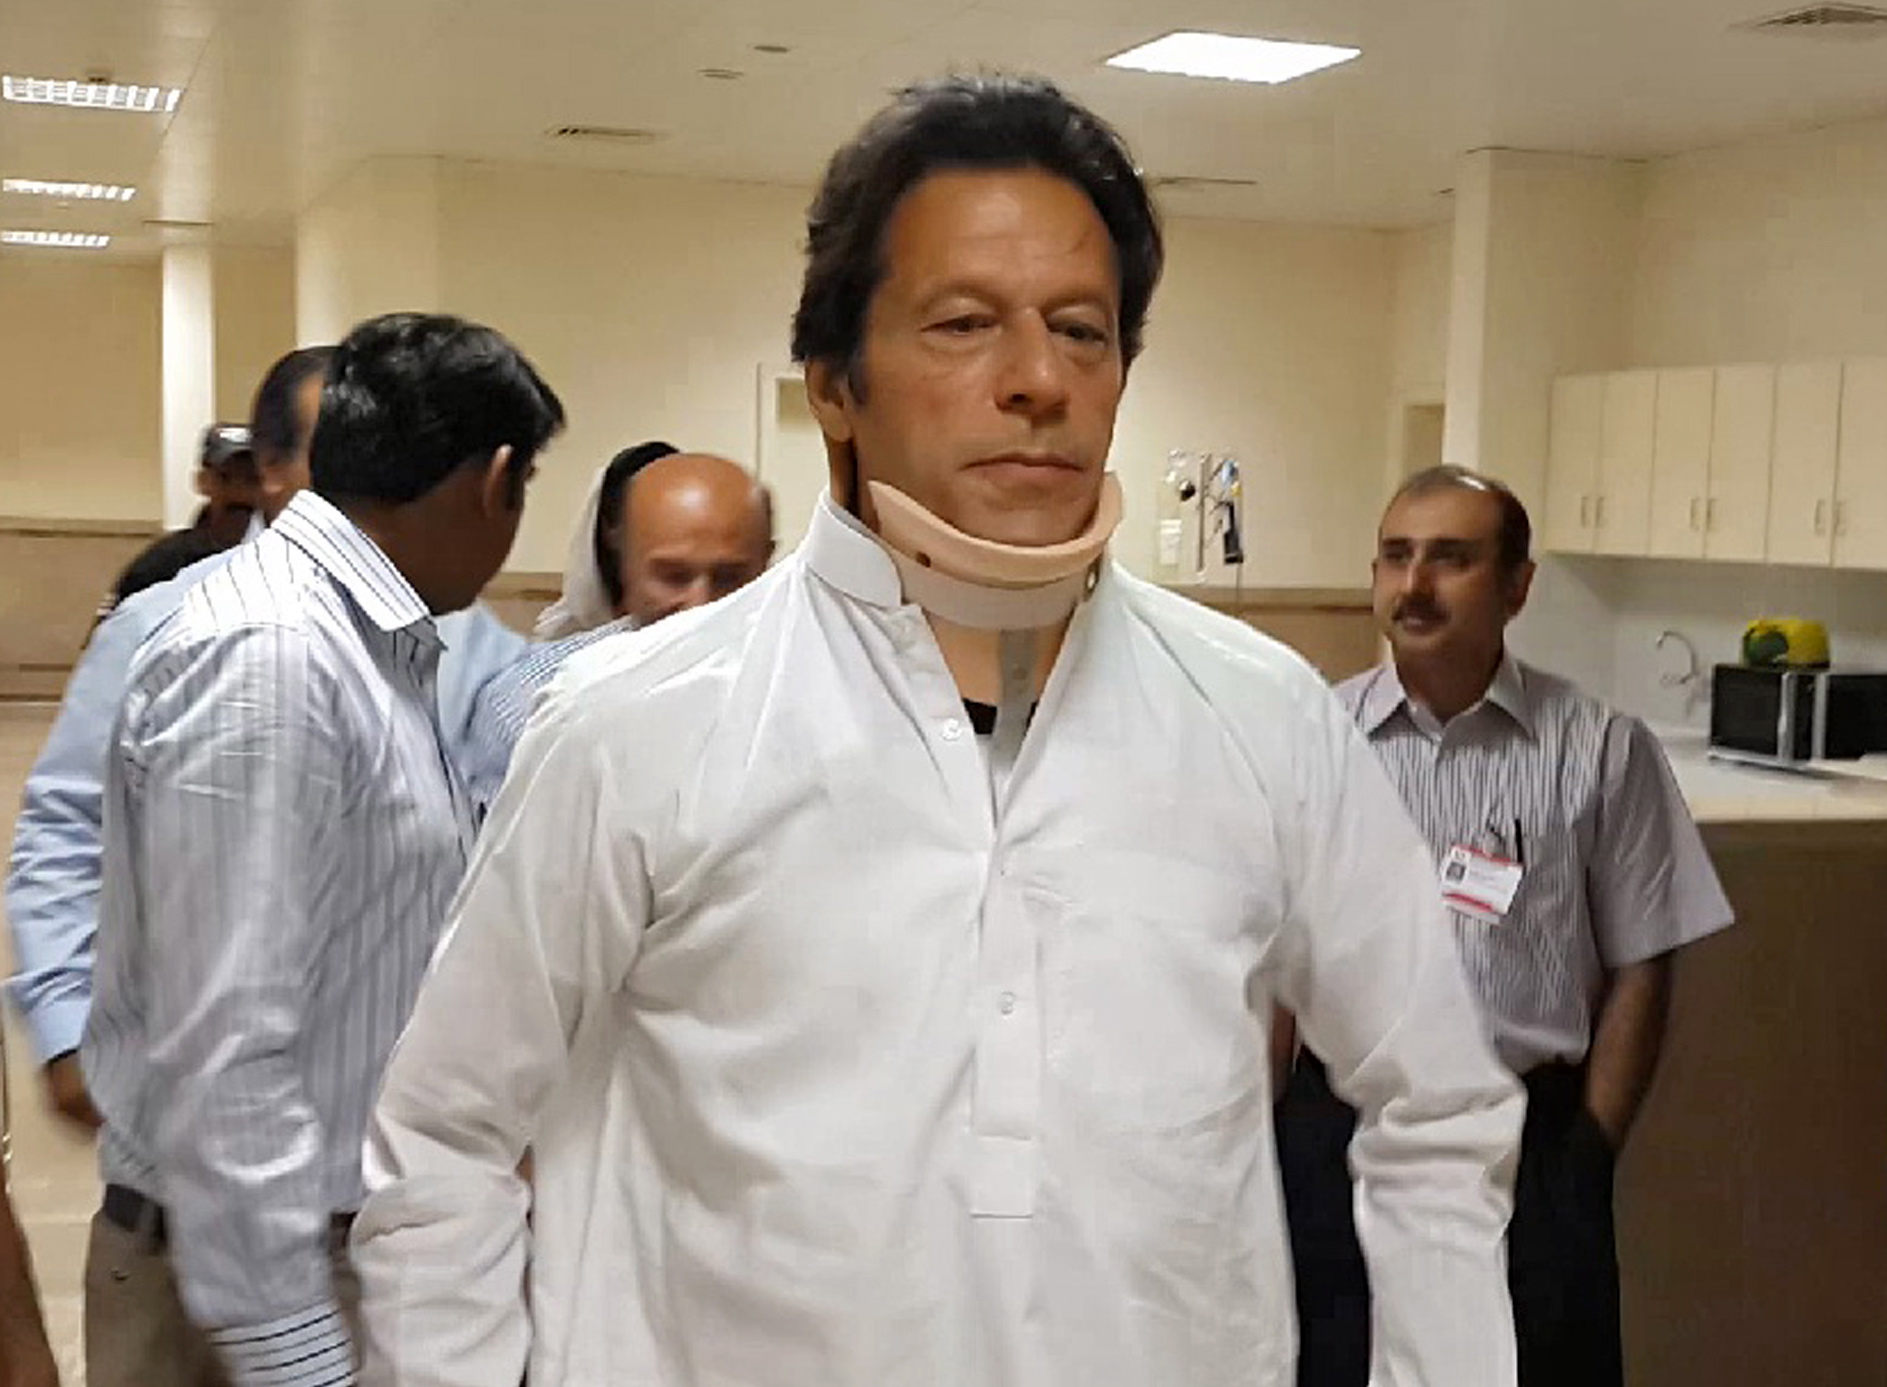 Pakistan's cricketer turned politician Imran Khan, leader of Pakistan Tehreek-e-Insaf party, leaves the hospital in Lahore, Pakistan, on Wednesday.